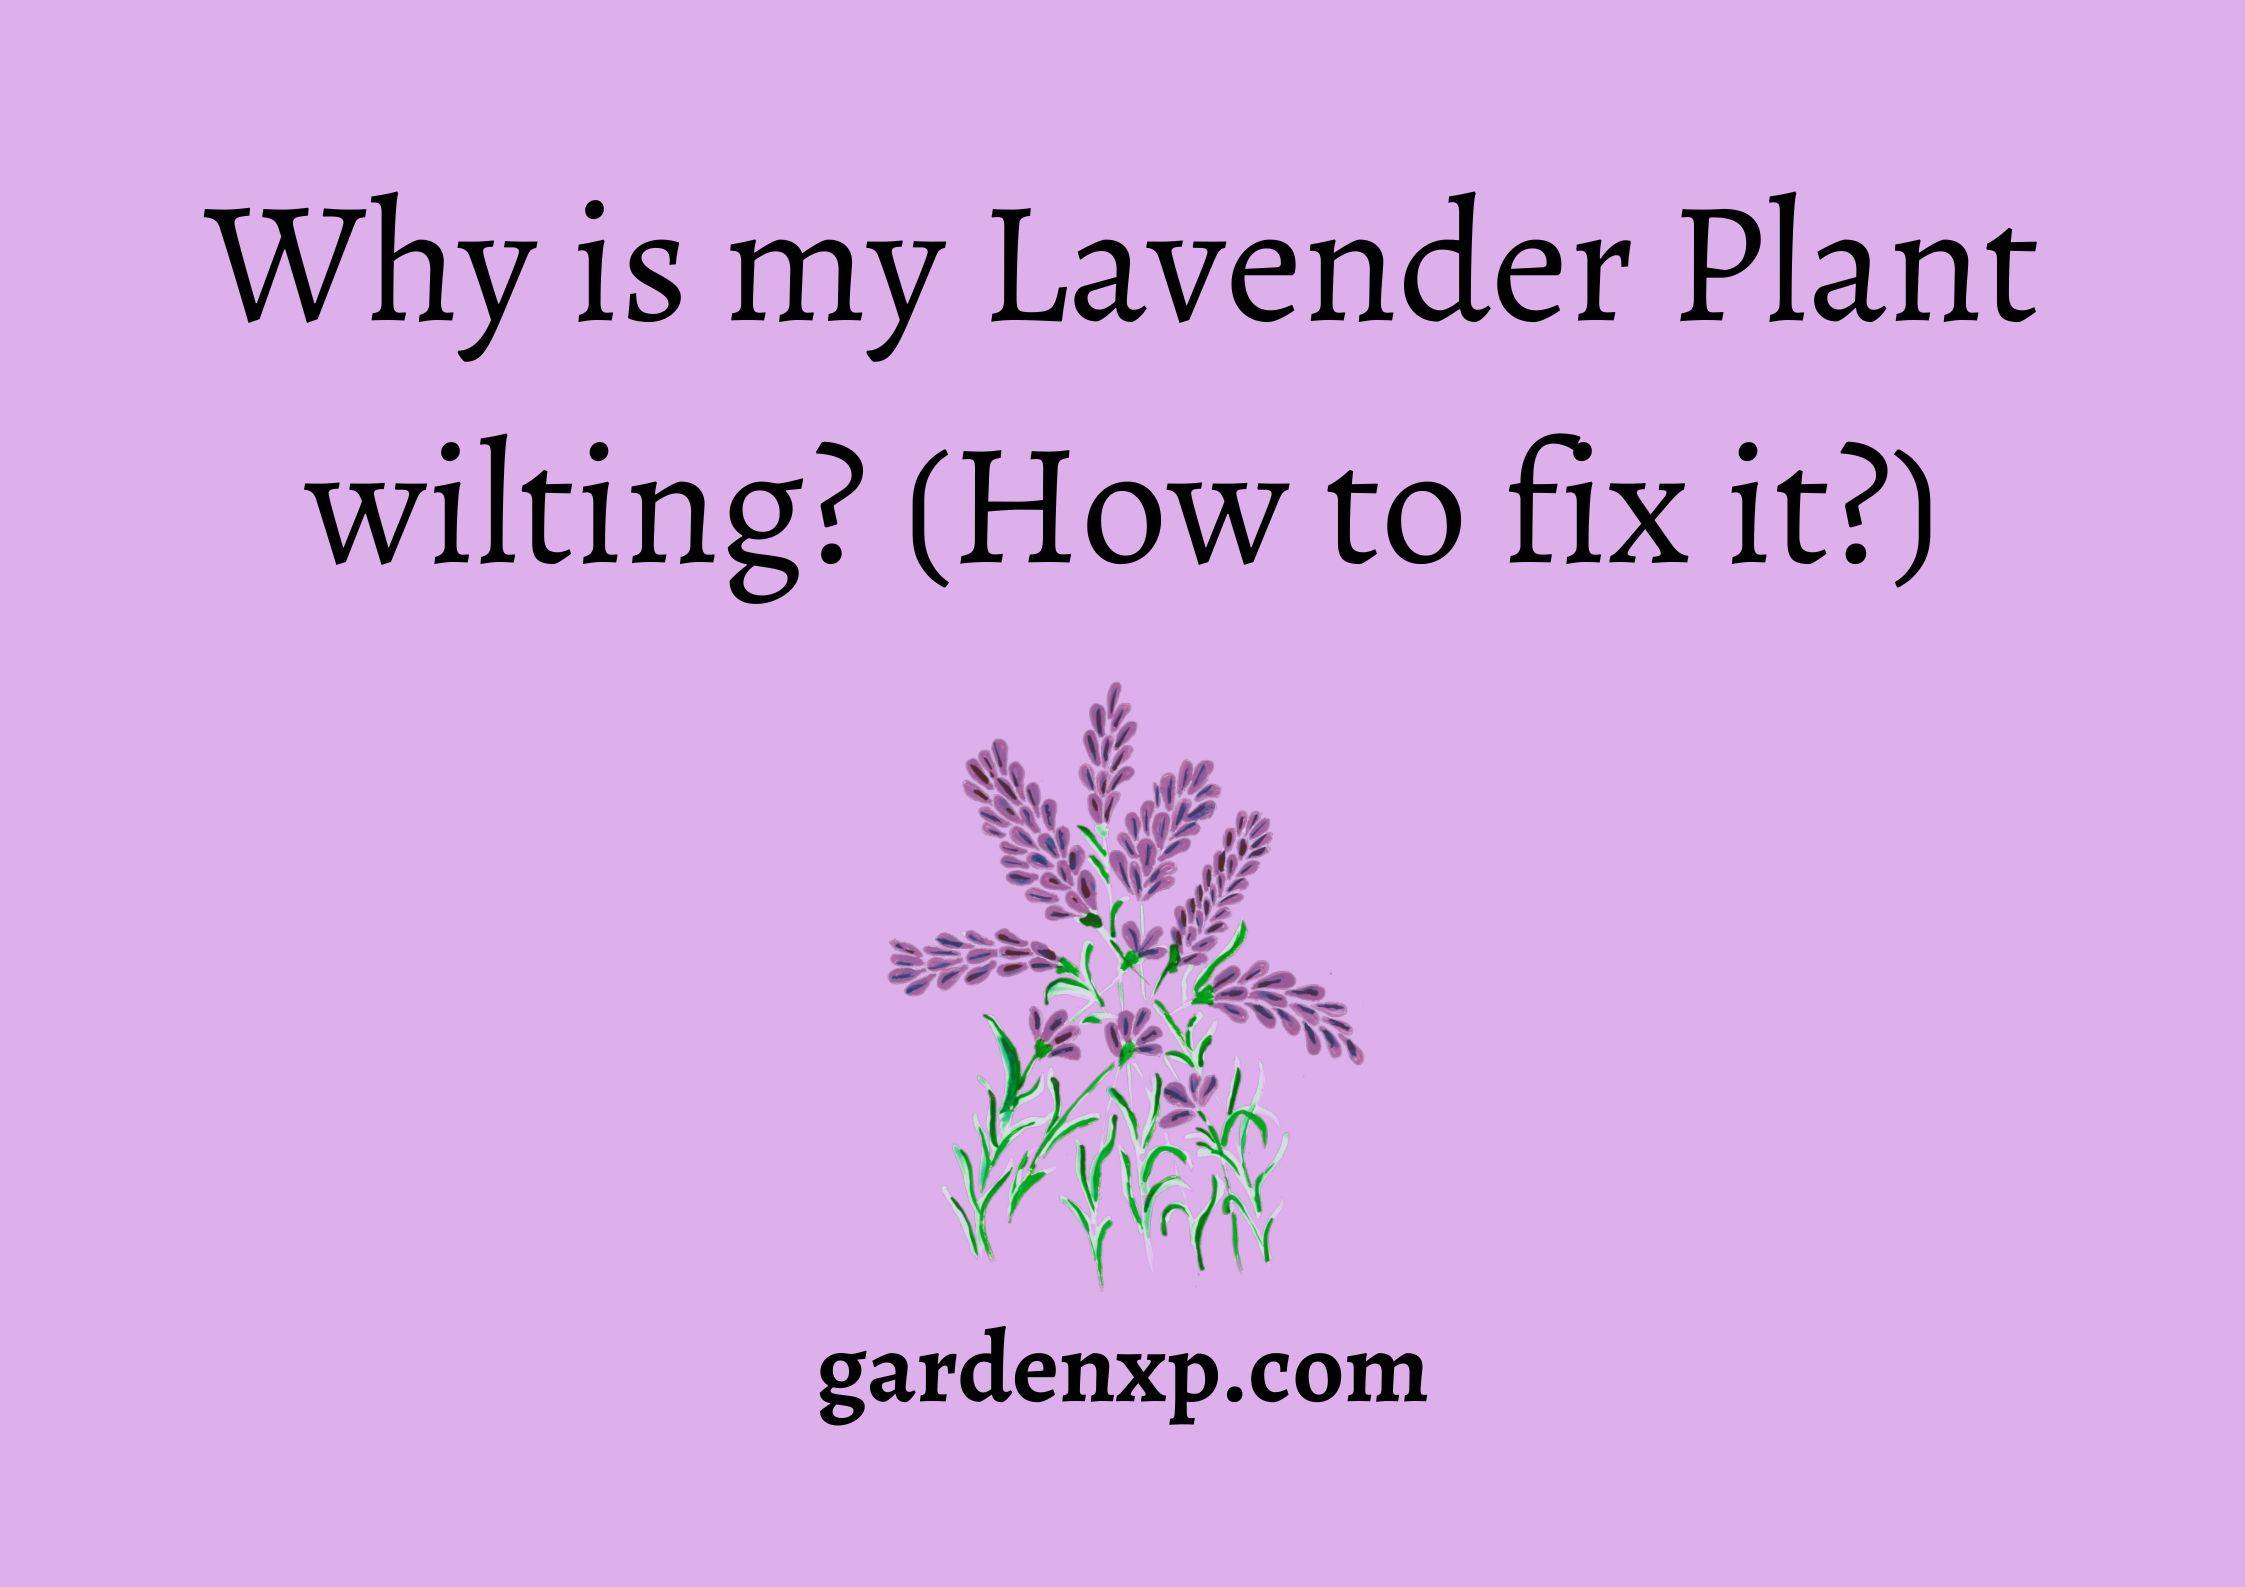 Why is my Lavender Plant wilting? (How to fix it?)